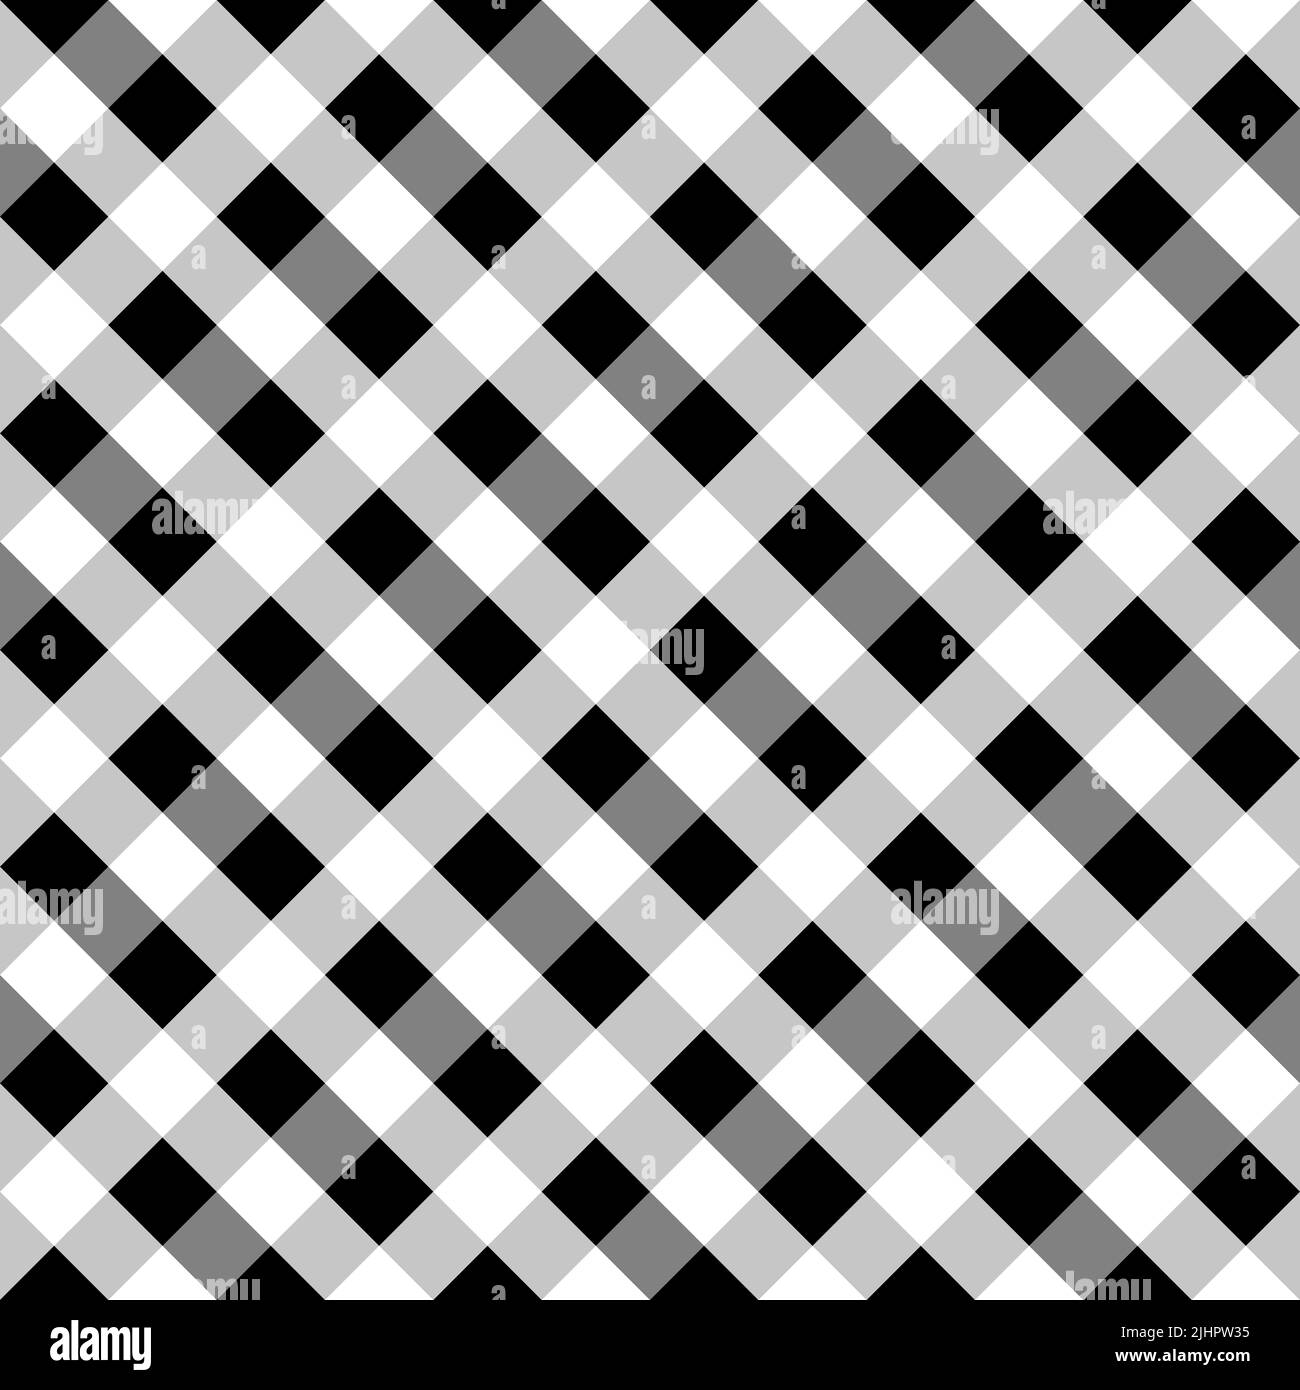 Black White Seamless Diagonal French Checkered Pattern. Inclined ...